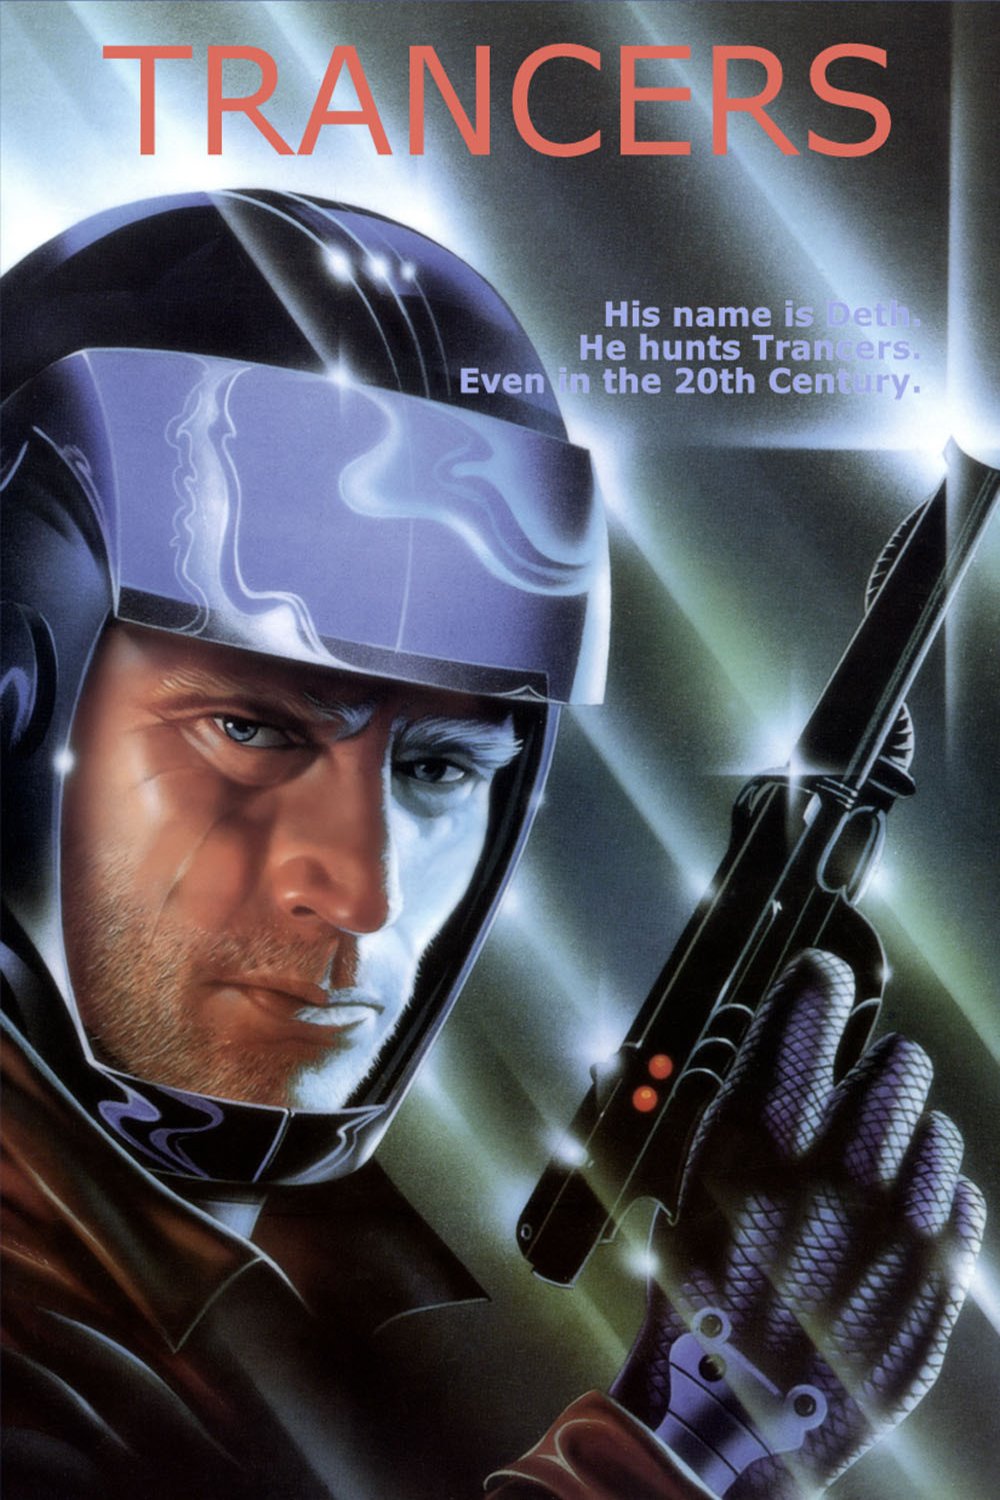 Poster of the movie Trancers